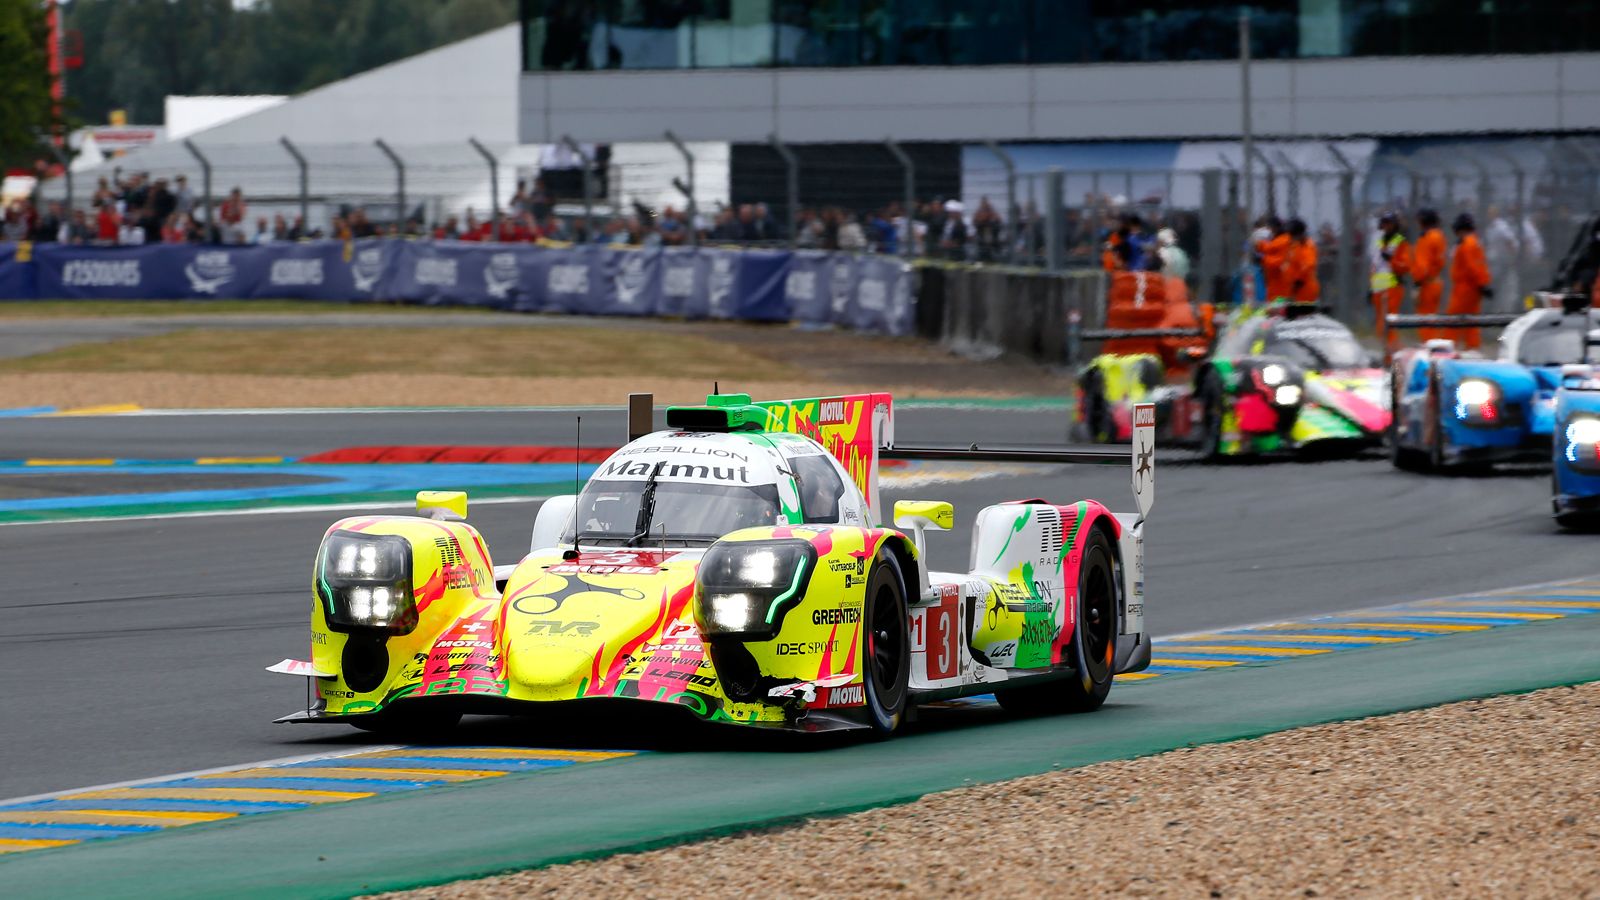 2019-20 preview: World Endurance Championship looks to promote LMP1 competition with 'success